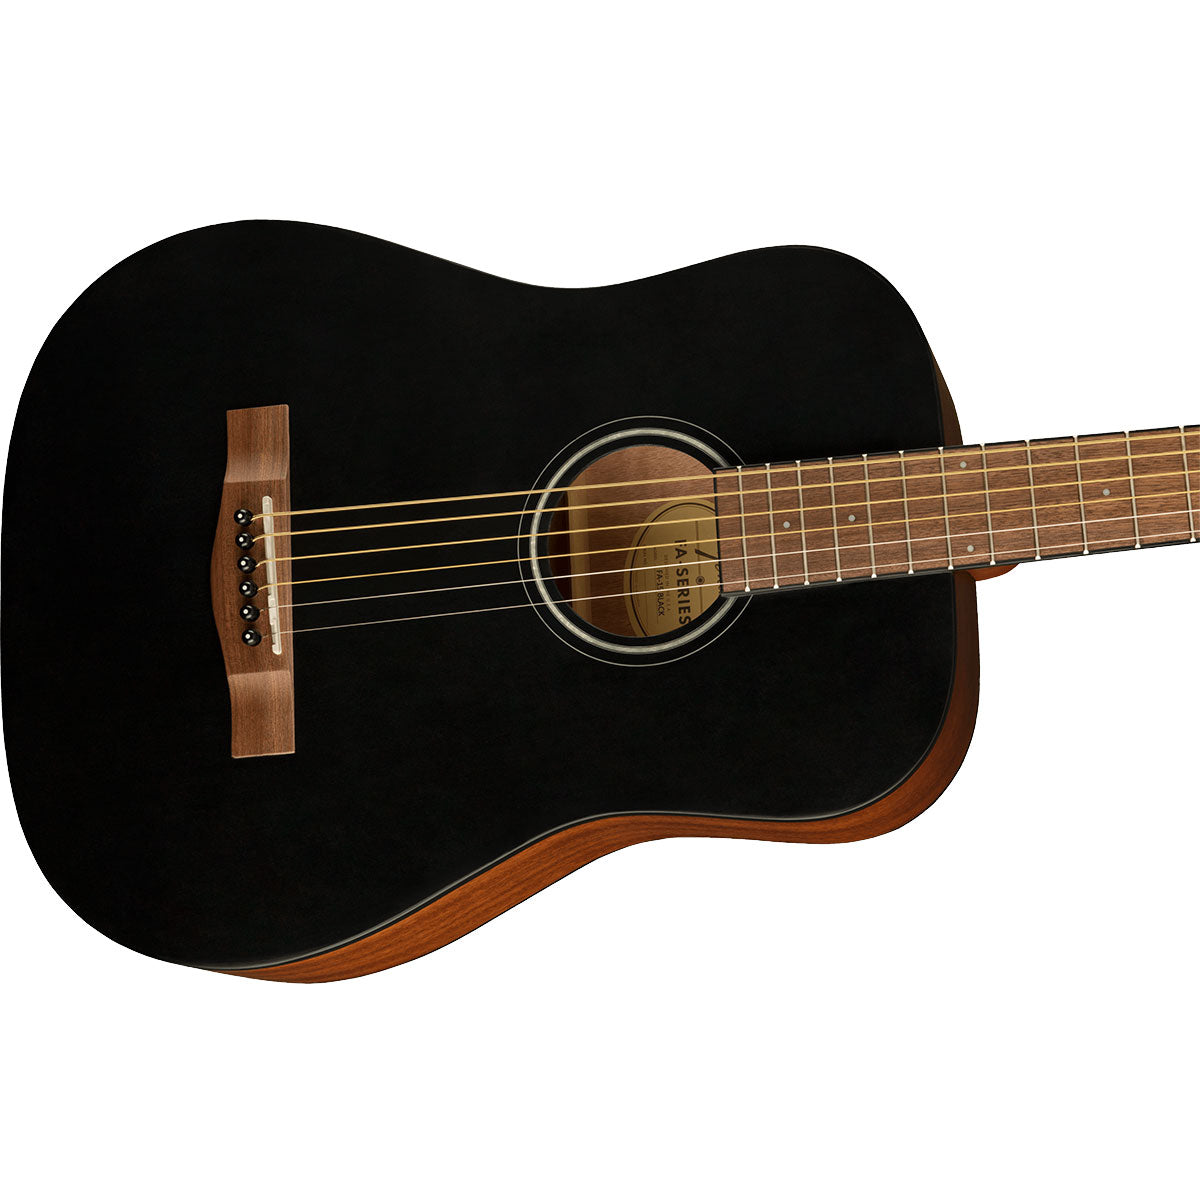 Close-up perspective view of Fender FA-15 3/4 Steel Acoustic Guitar - Black showing top and right side of body and portion of fretboard